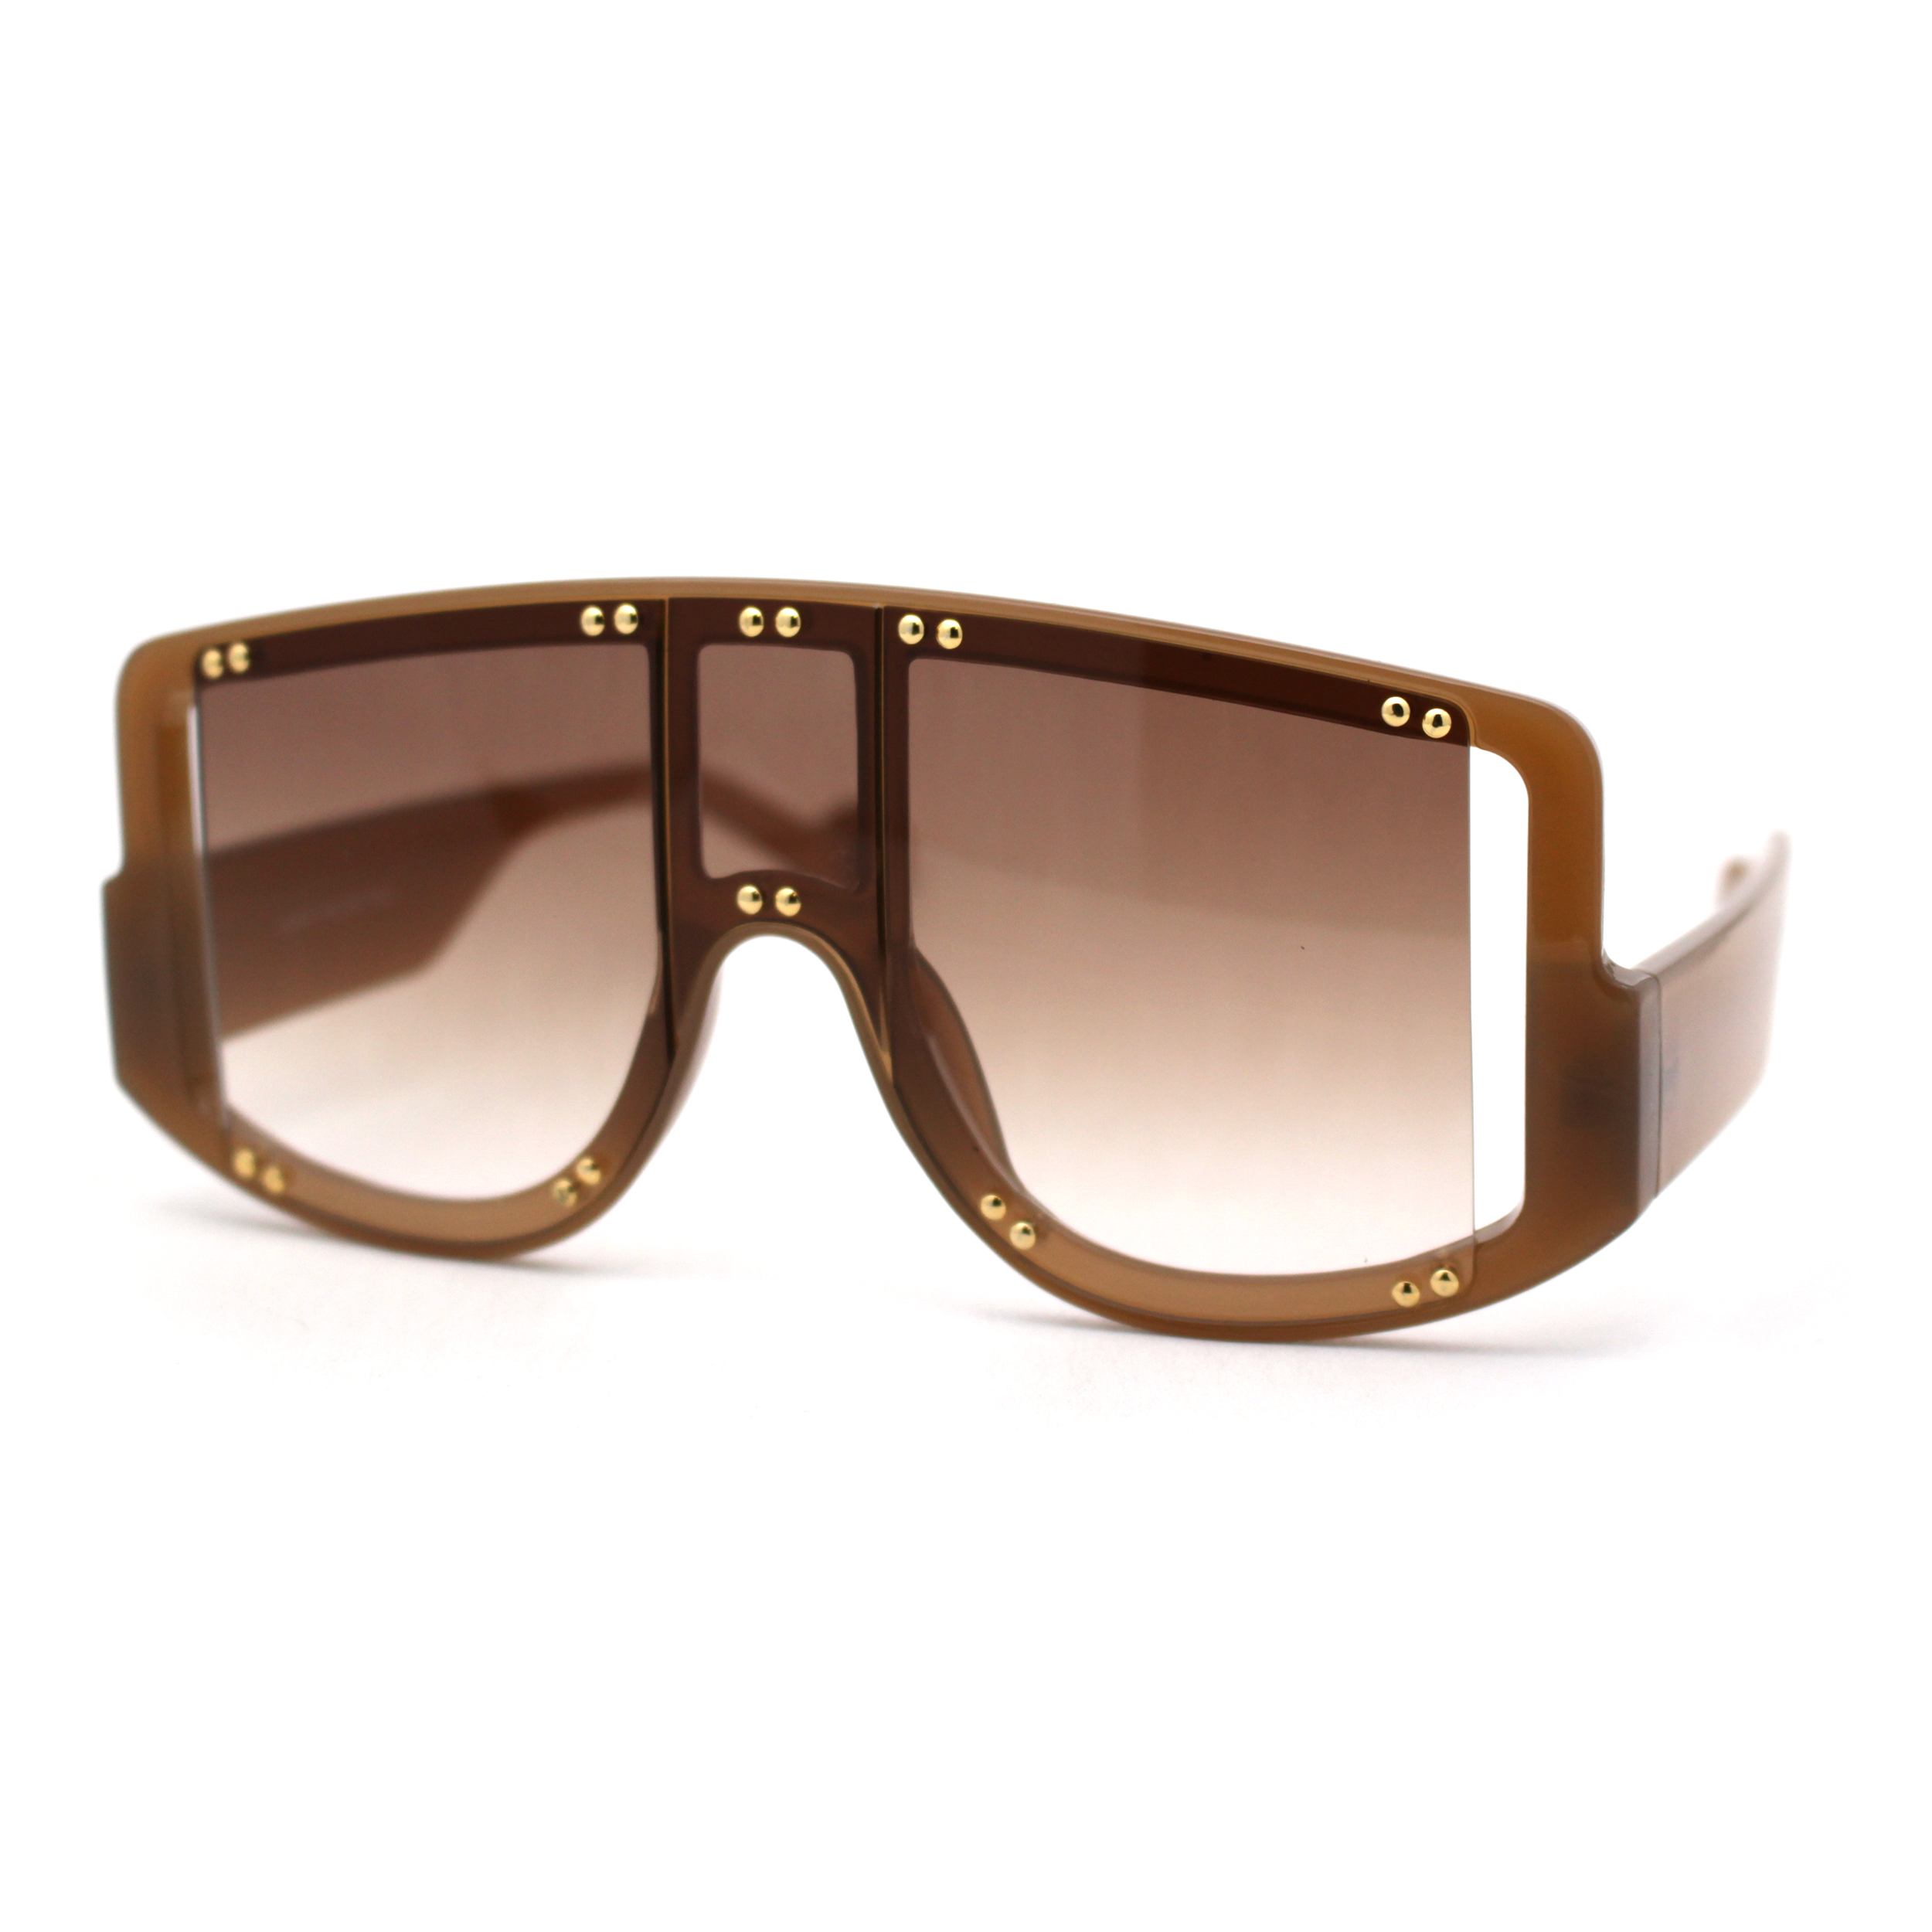 Multi Panel Shield Drop Temple Plastic Curved Top Racer Sunglasses All Brown - image 2 of 4